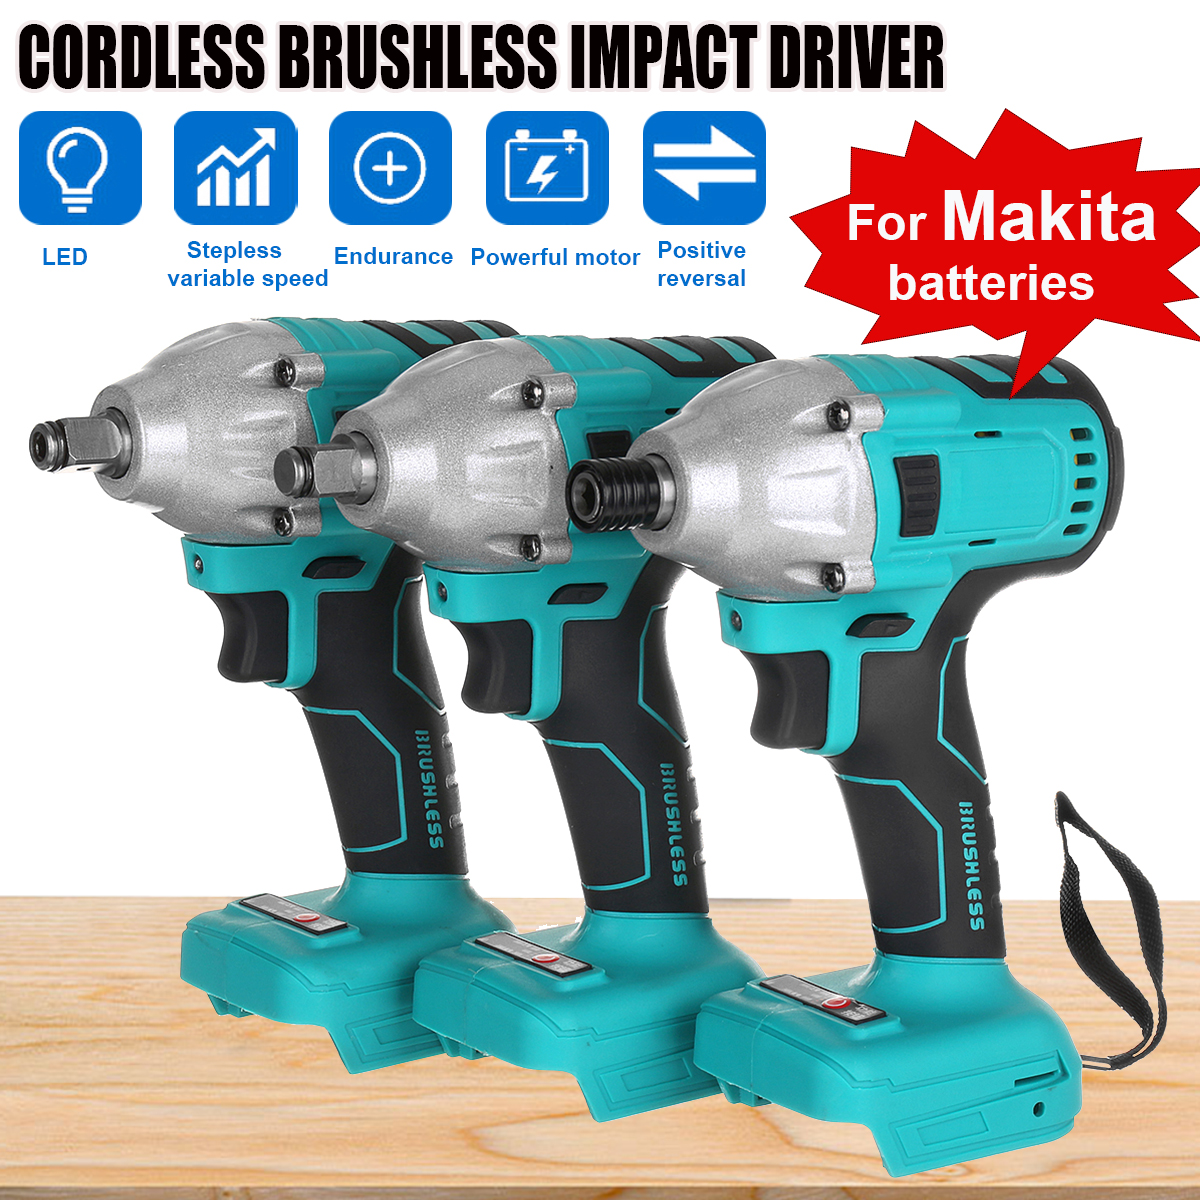 Blue-Cordless-Brushless-Impact-Wrench-Drill-Drive-Machine-For-Makita-18V-Battery-1769333-1